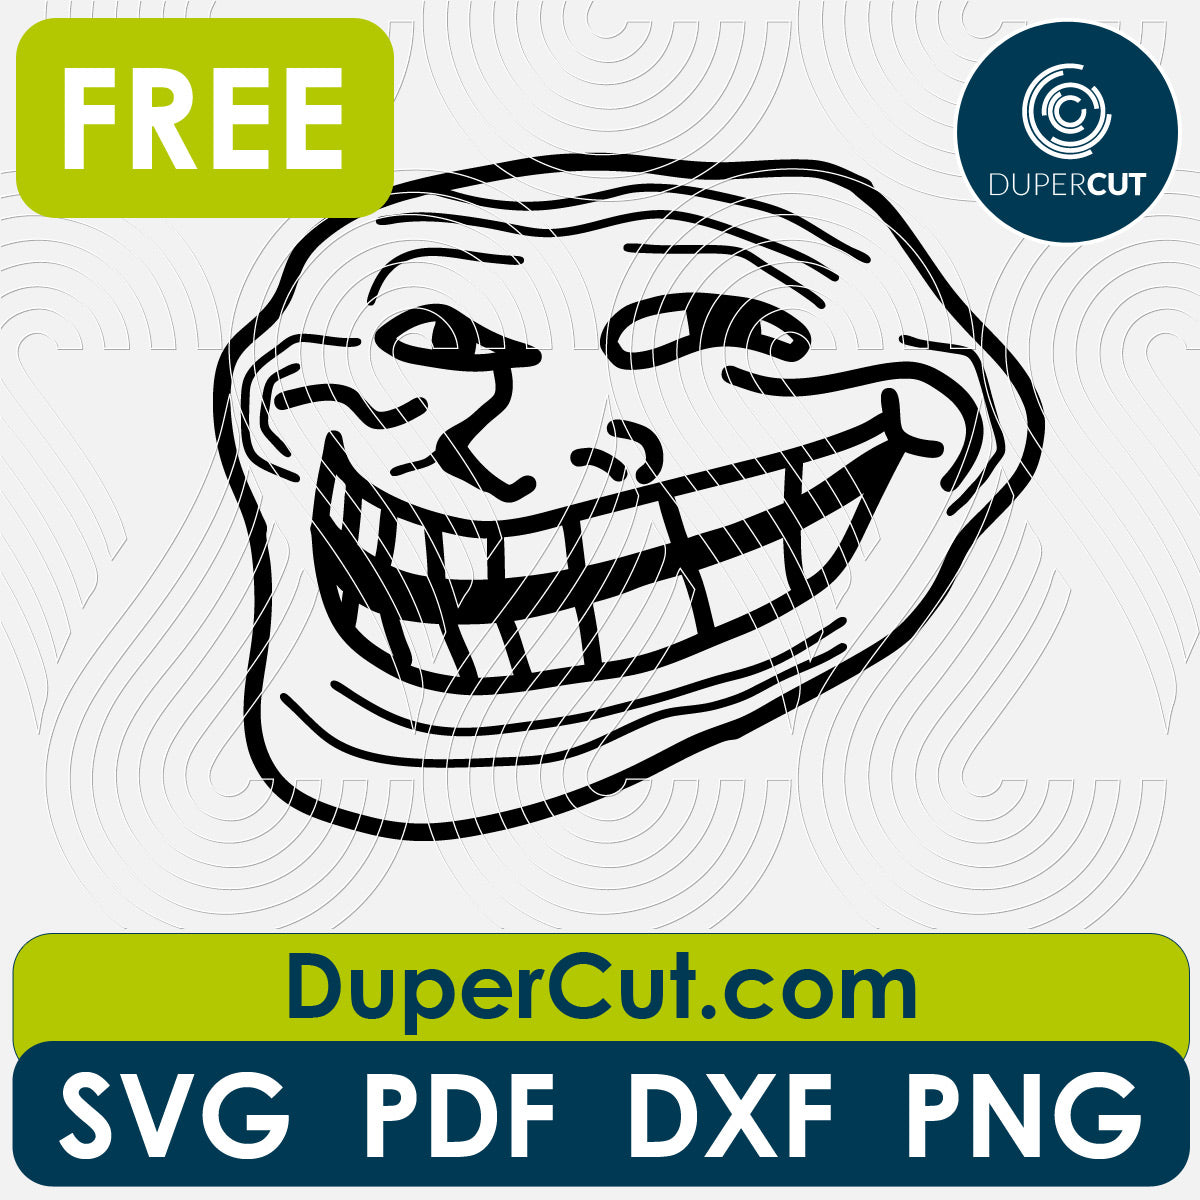 Trollface meme free cutting template SVG PNG DXF files for Glowforge, Cricut, Silhouette, CNC laser router by DuperCut.com